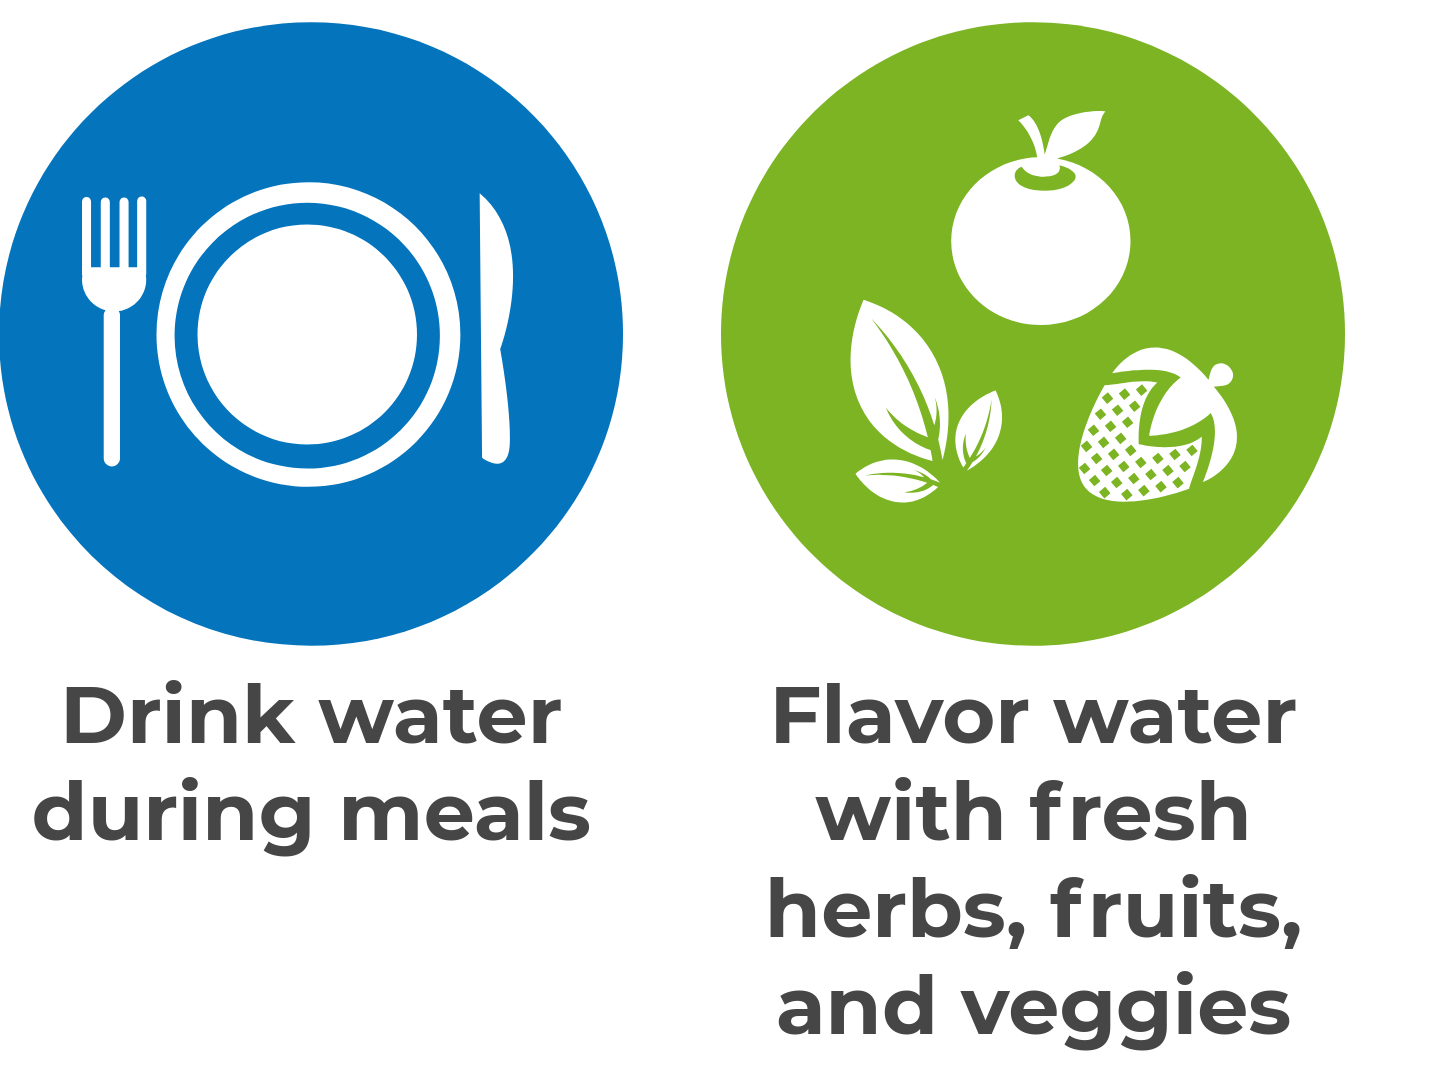 Drink water during meals and flavor water with fresh herbs, fruits, and  veggies